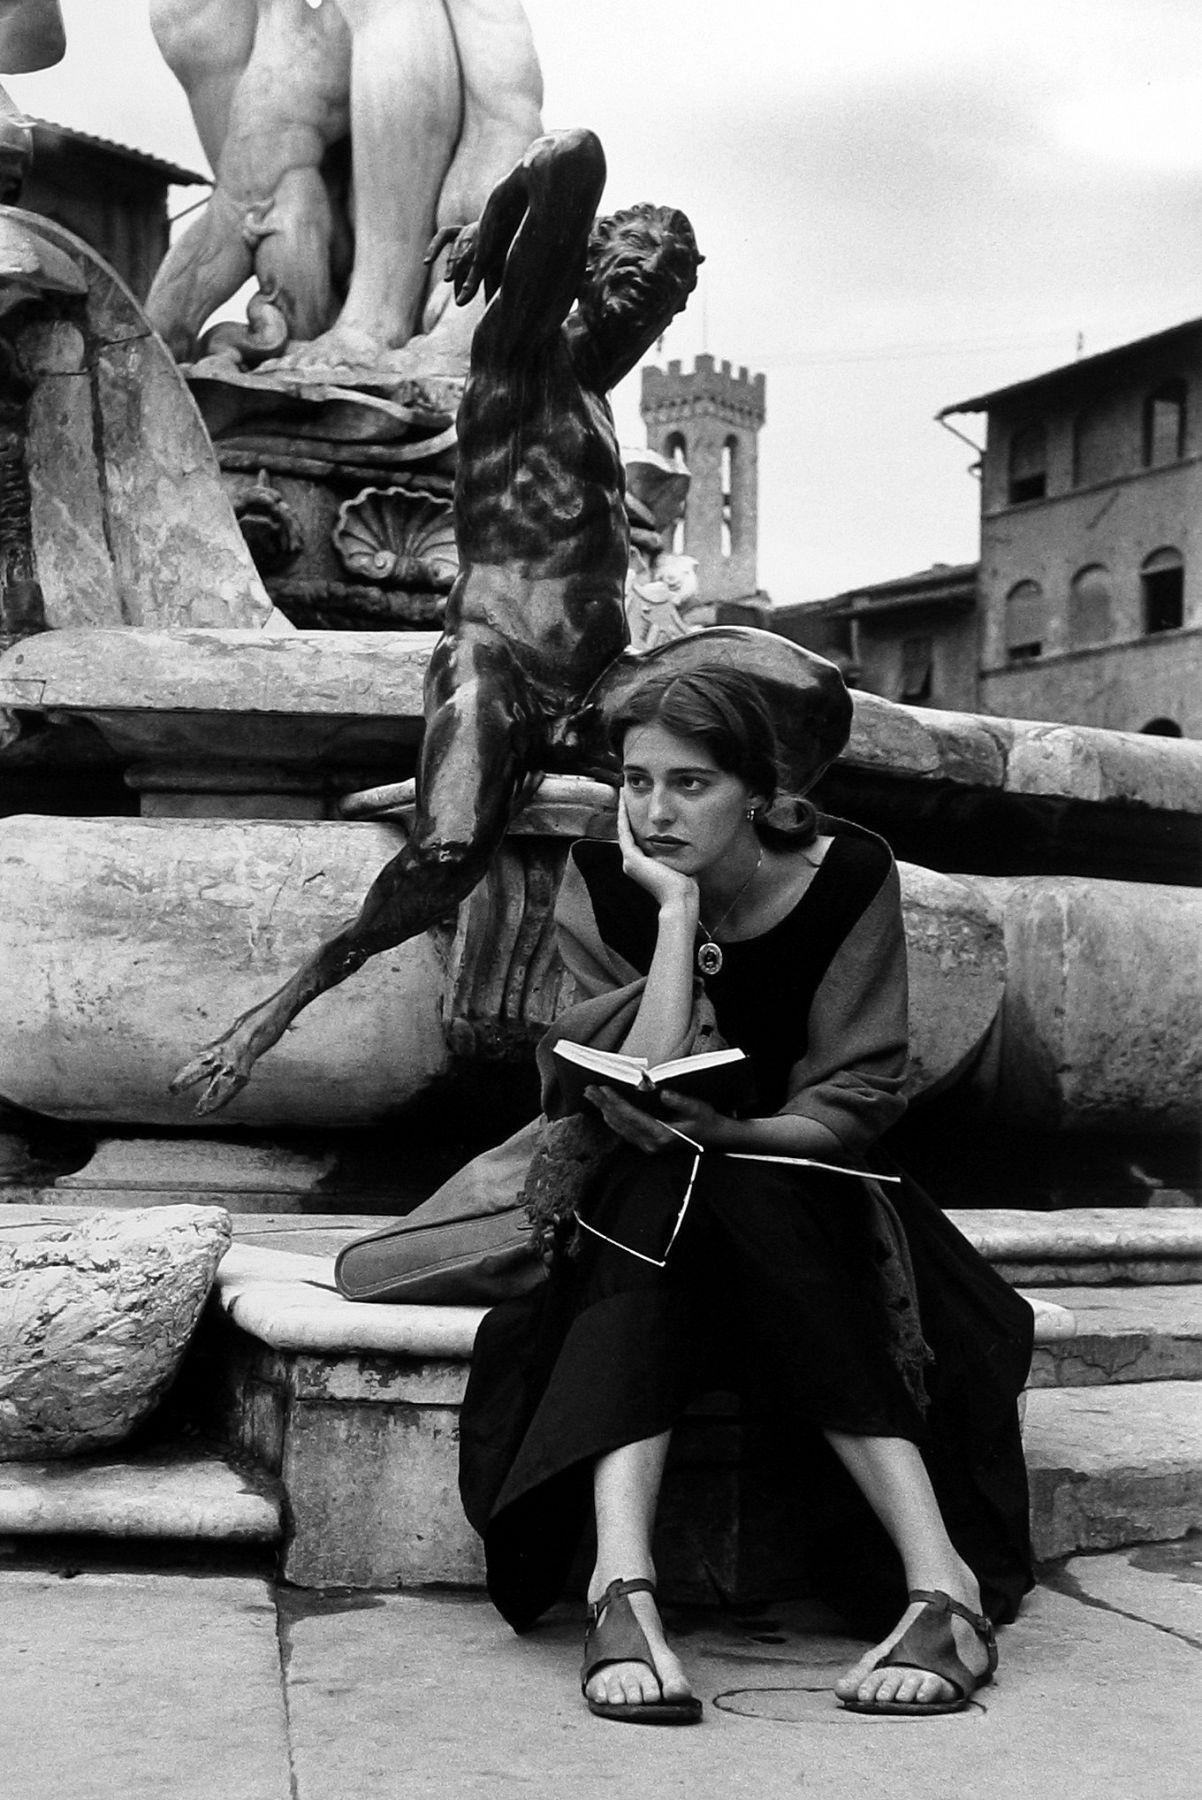 Ruth Orkin, Tired Tourist, Florence, 1951